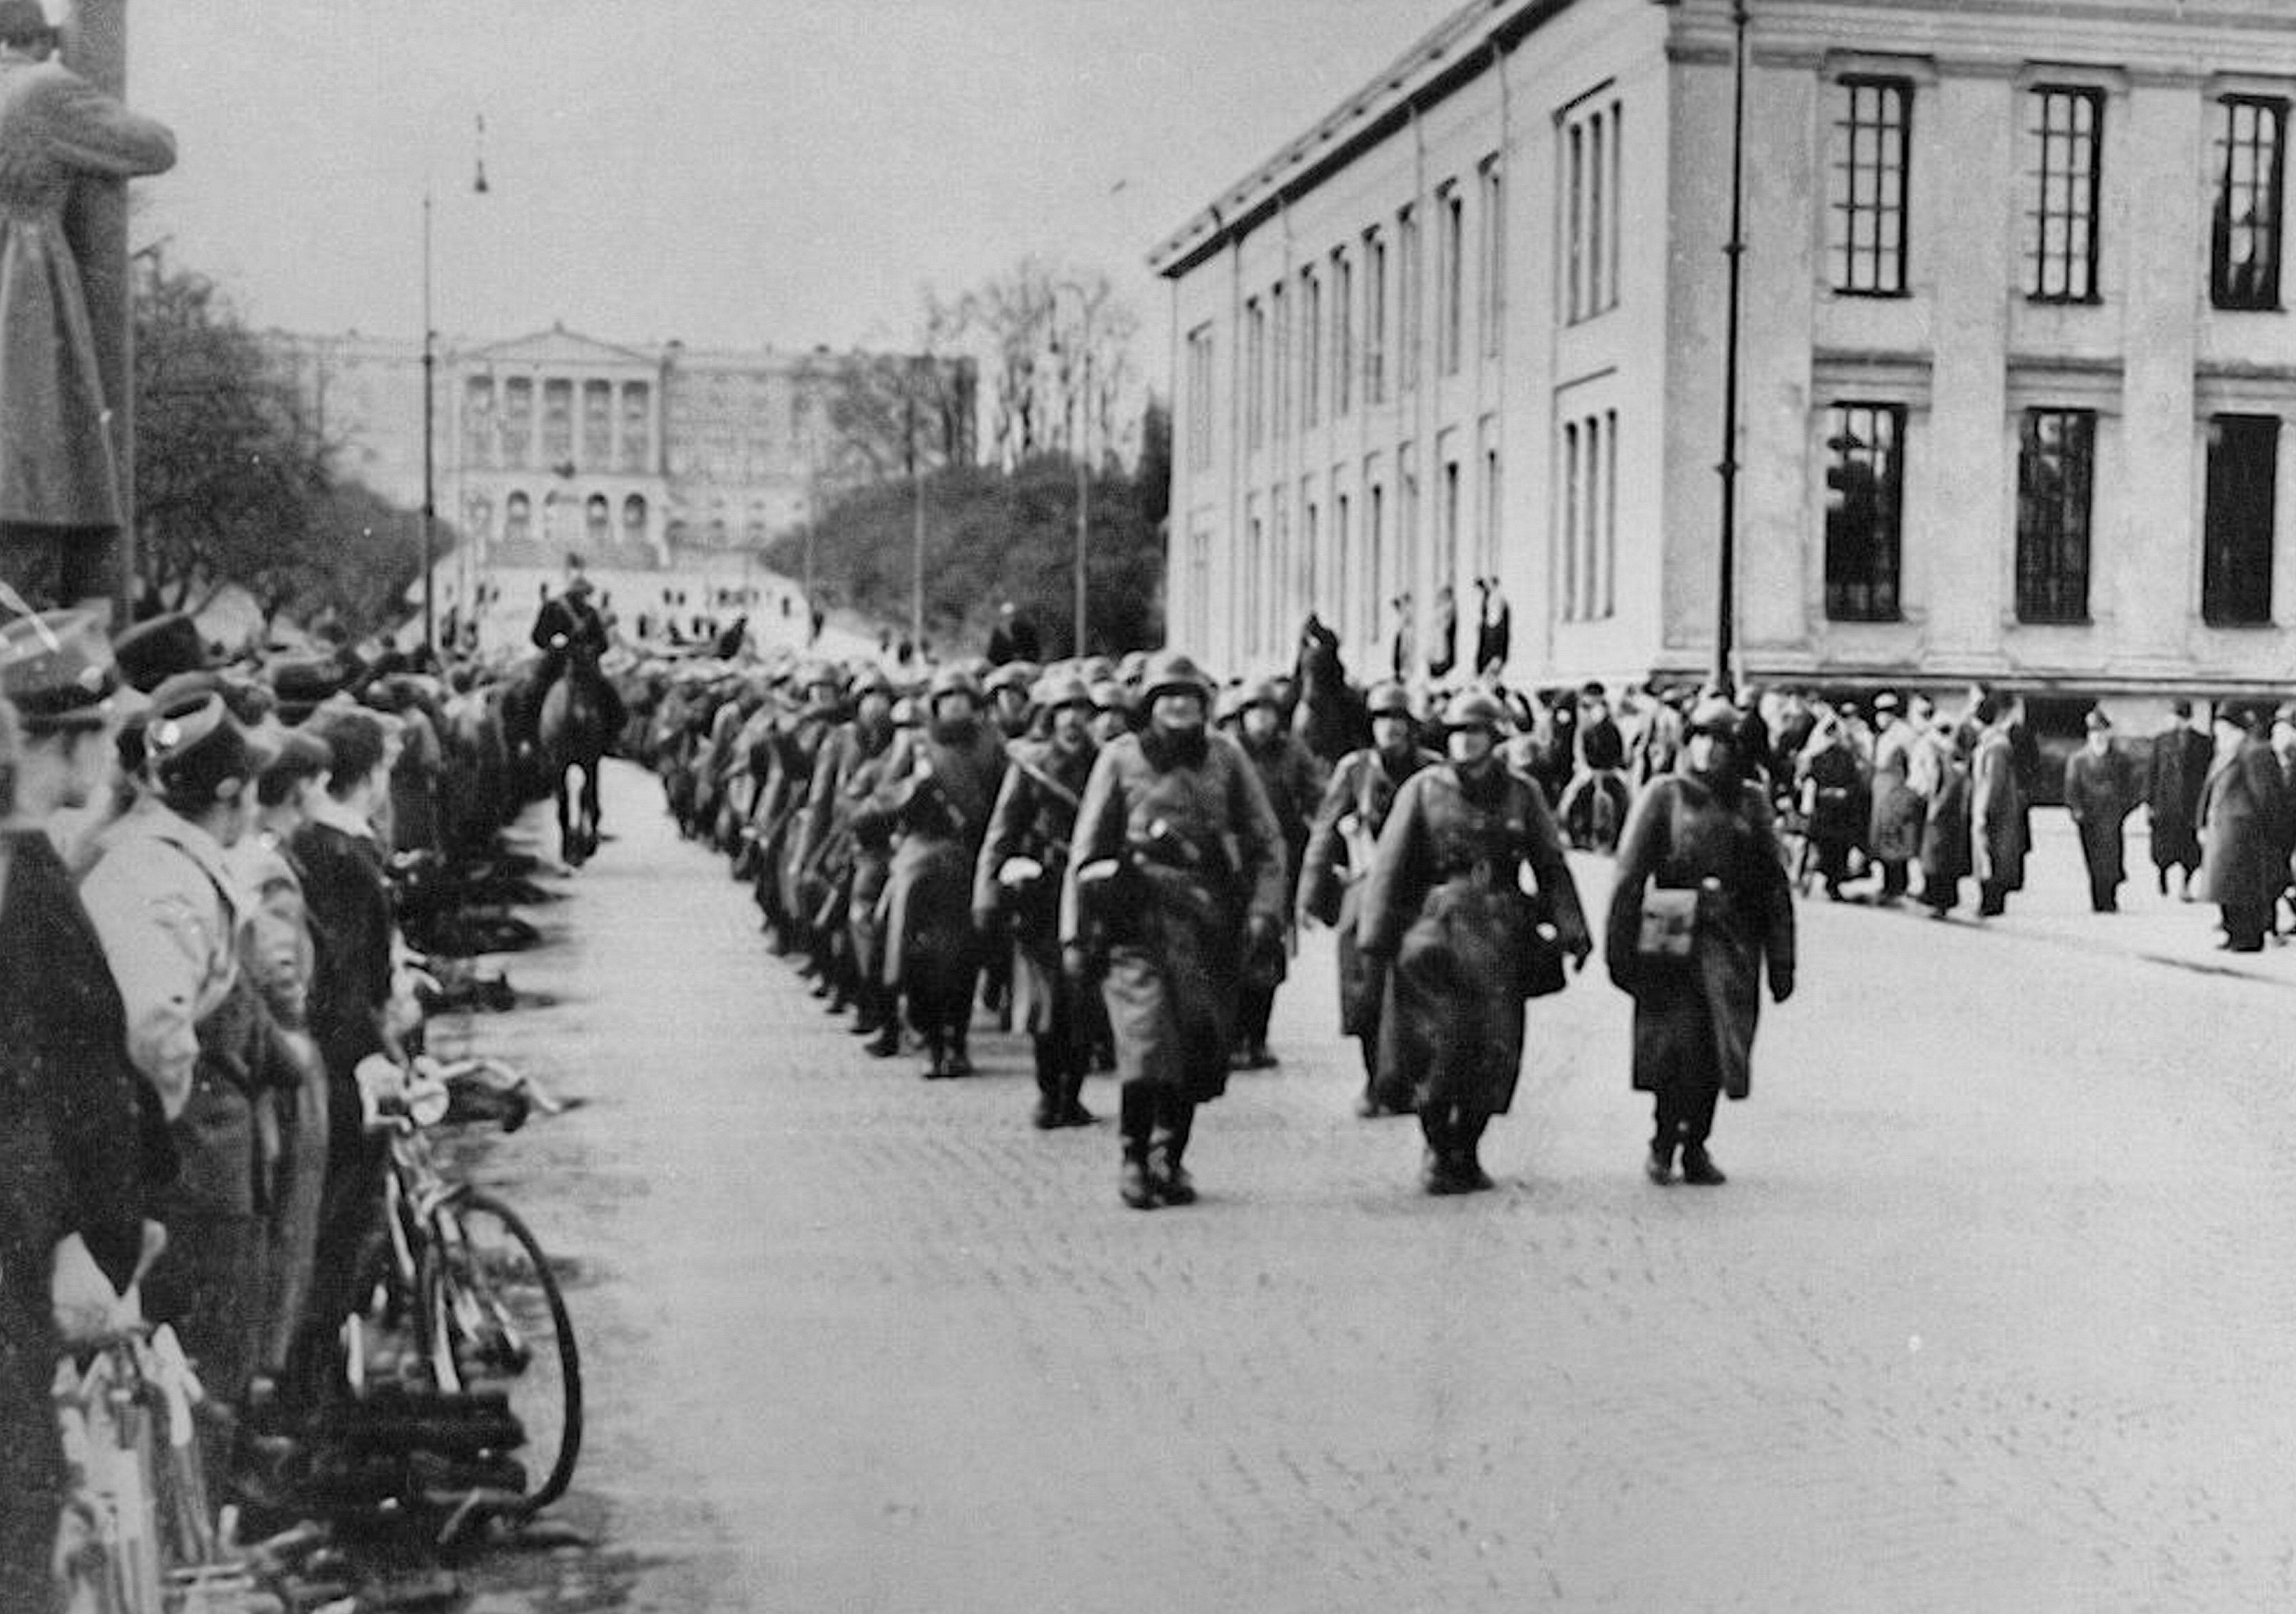 Photograph of German soldiers marching down main street of Oslo during the invasion of Norway. Dated 1940 WHA PUBLICATIONxINxGERxSUIxAUTxONLY !ACHTUNG AUFNAHMEDATUM GESCHÄTZT! Copyright: WHA UnitedArchivesWHA_047_0496

Photo of German Soldiers Marching Down Main Street of Oslo during The Invasion of Norway dated 1940 Wha PUBLICATIONxINxGERxSUIxAUTxONLY Regard date estimated Copyright Wha UnitedArchivesWHA_047_0496